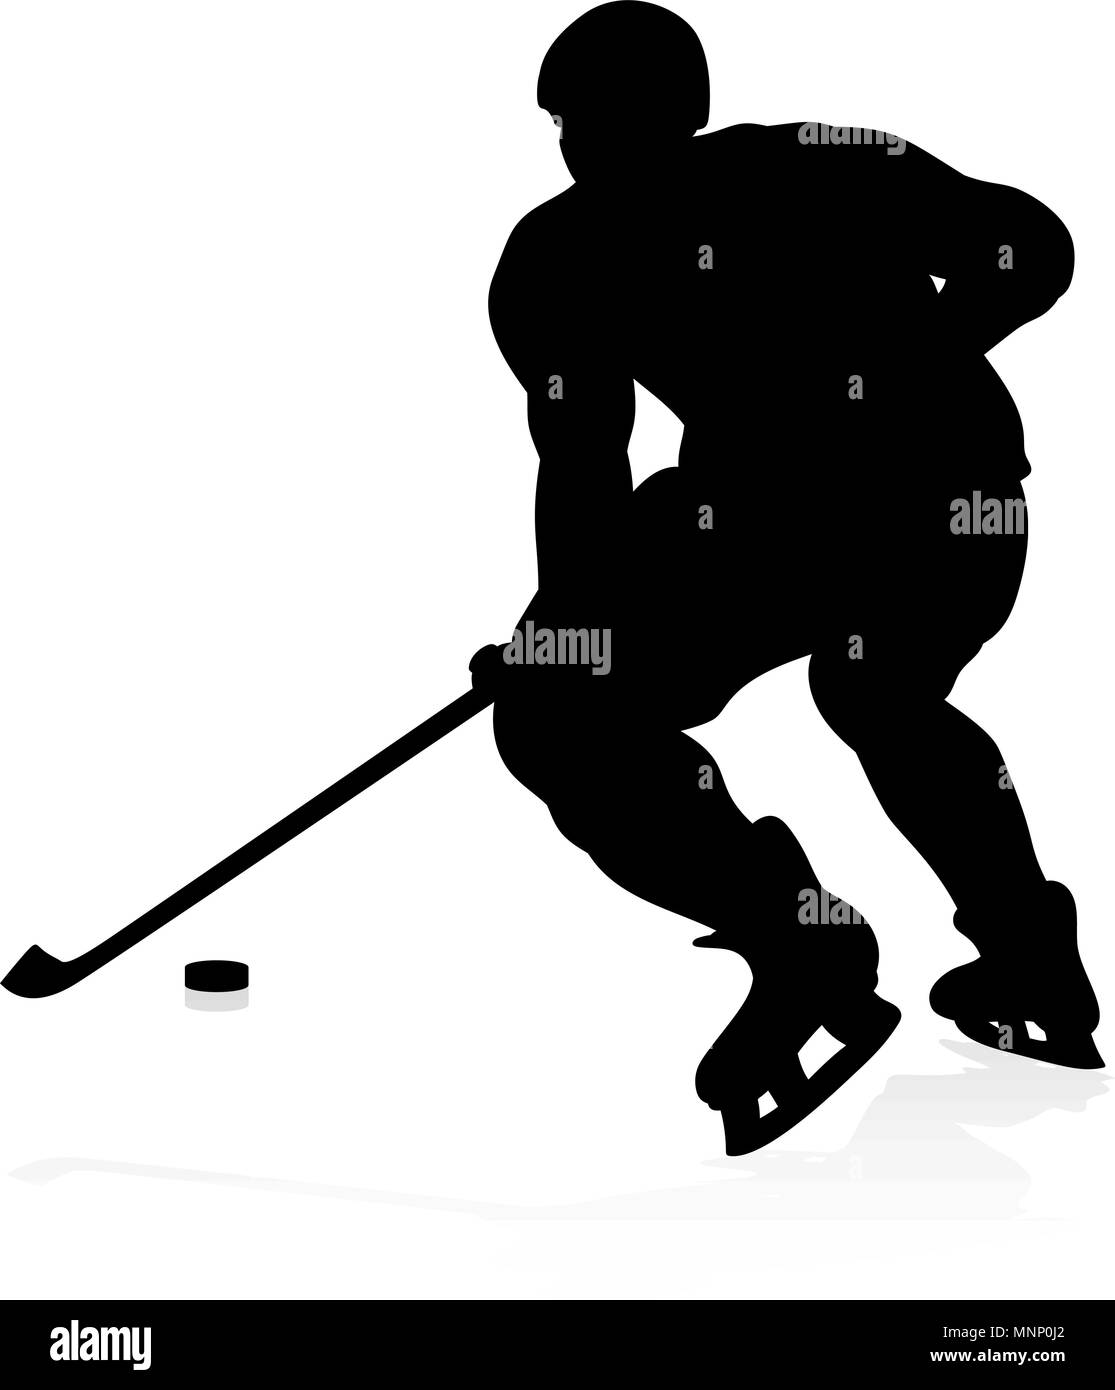 3,523 Hockey Goalie Silhouette Images, Stock Photos, 3D objects, & Vectors